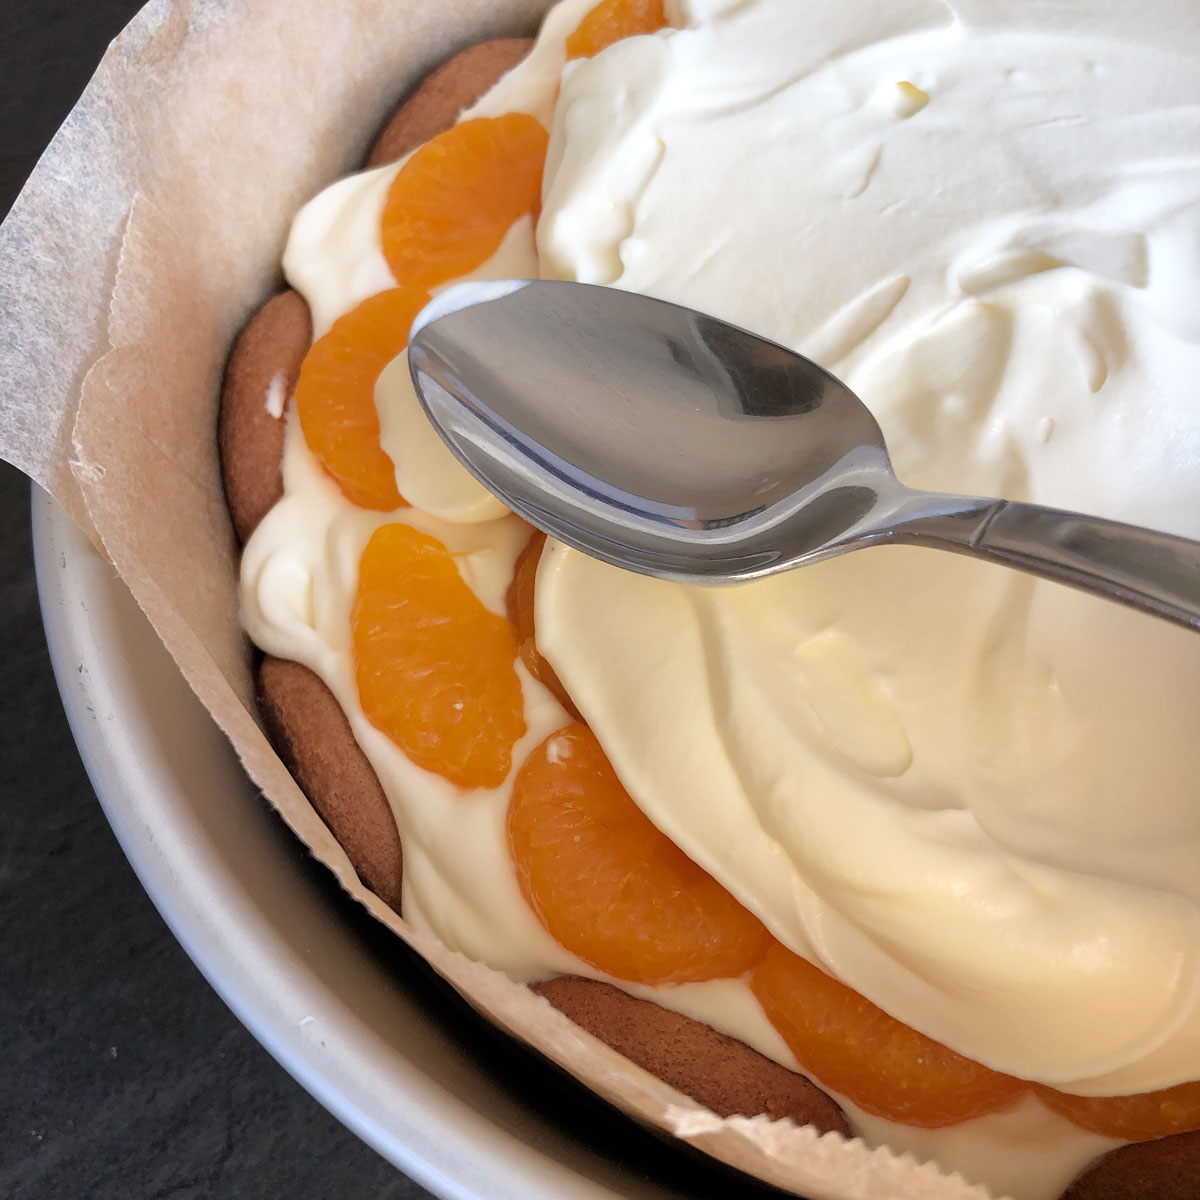 A spoon spreadding whipped cream over a layer of tinned mandarins.